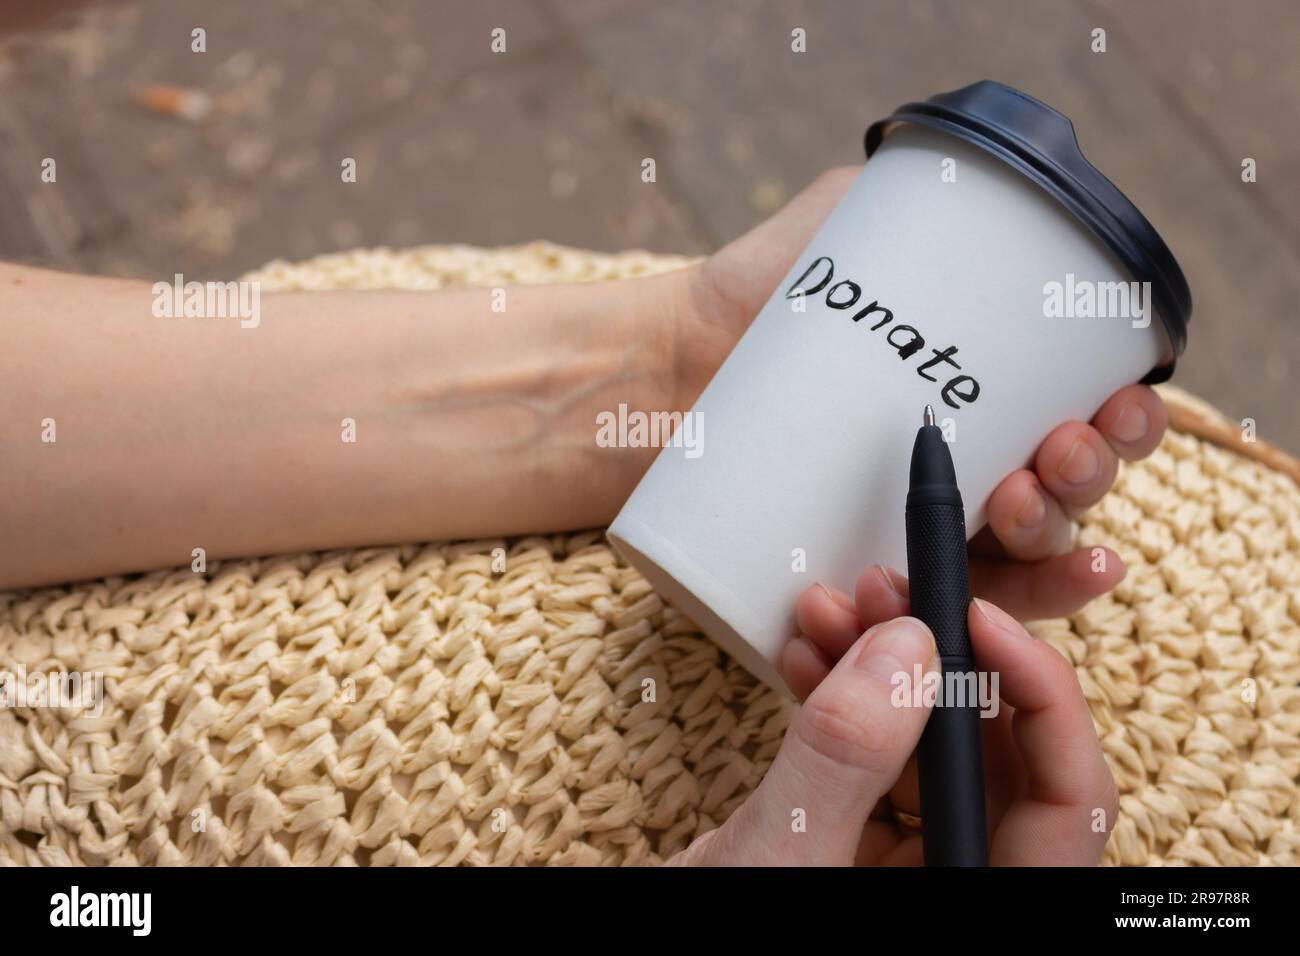 Woman drawing word donate on white cup. Charity concept. Hand holding cup of coffee take away. Donate logo on paper cup. Donation concept. Stock Photo